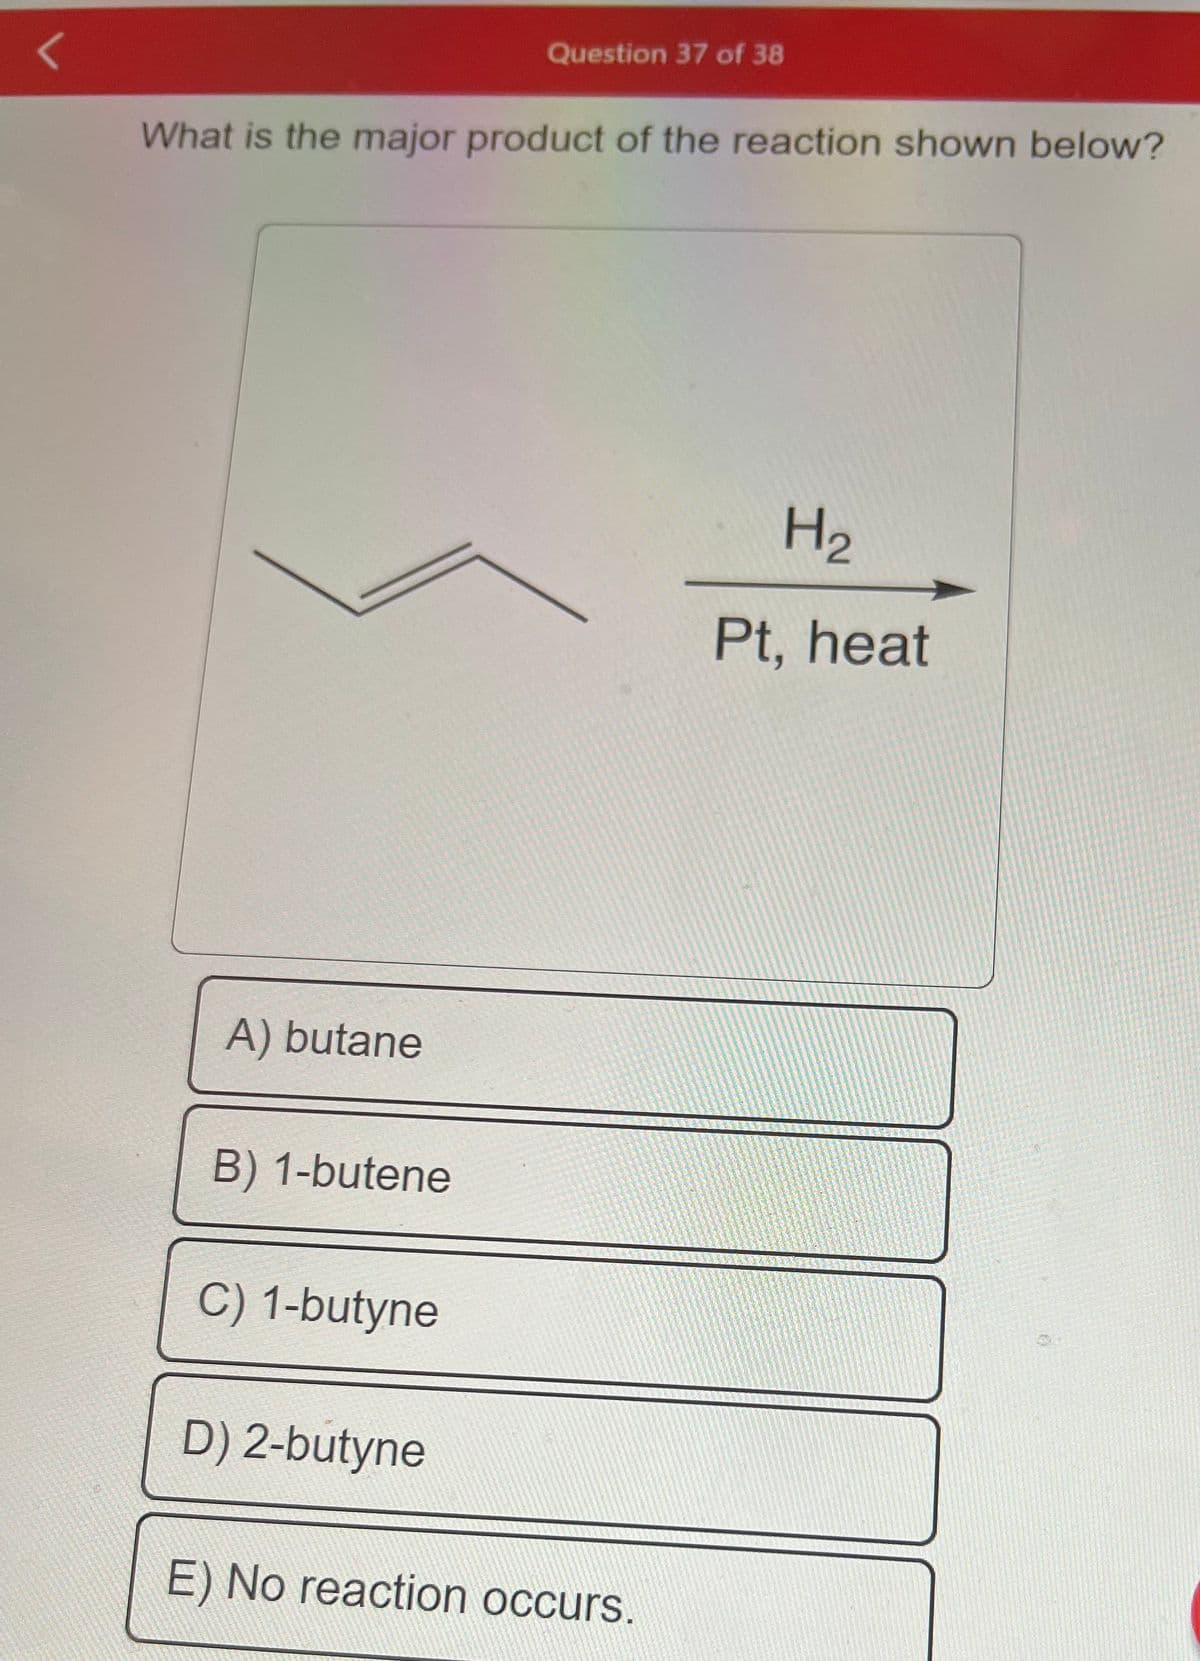 What is the major product of the reaction shown below?
A) butane
B) 1-butene
C) 1-butyne
Question 37 of 38
D) 2-butyne
E) No reaction occurs.
H₂
Pt, heat